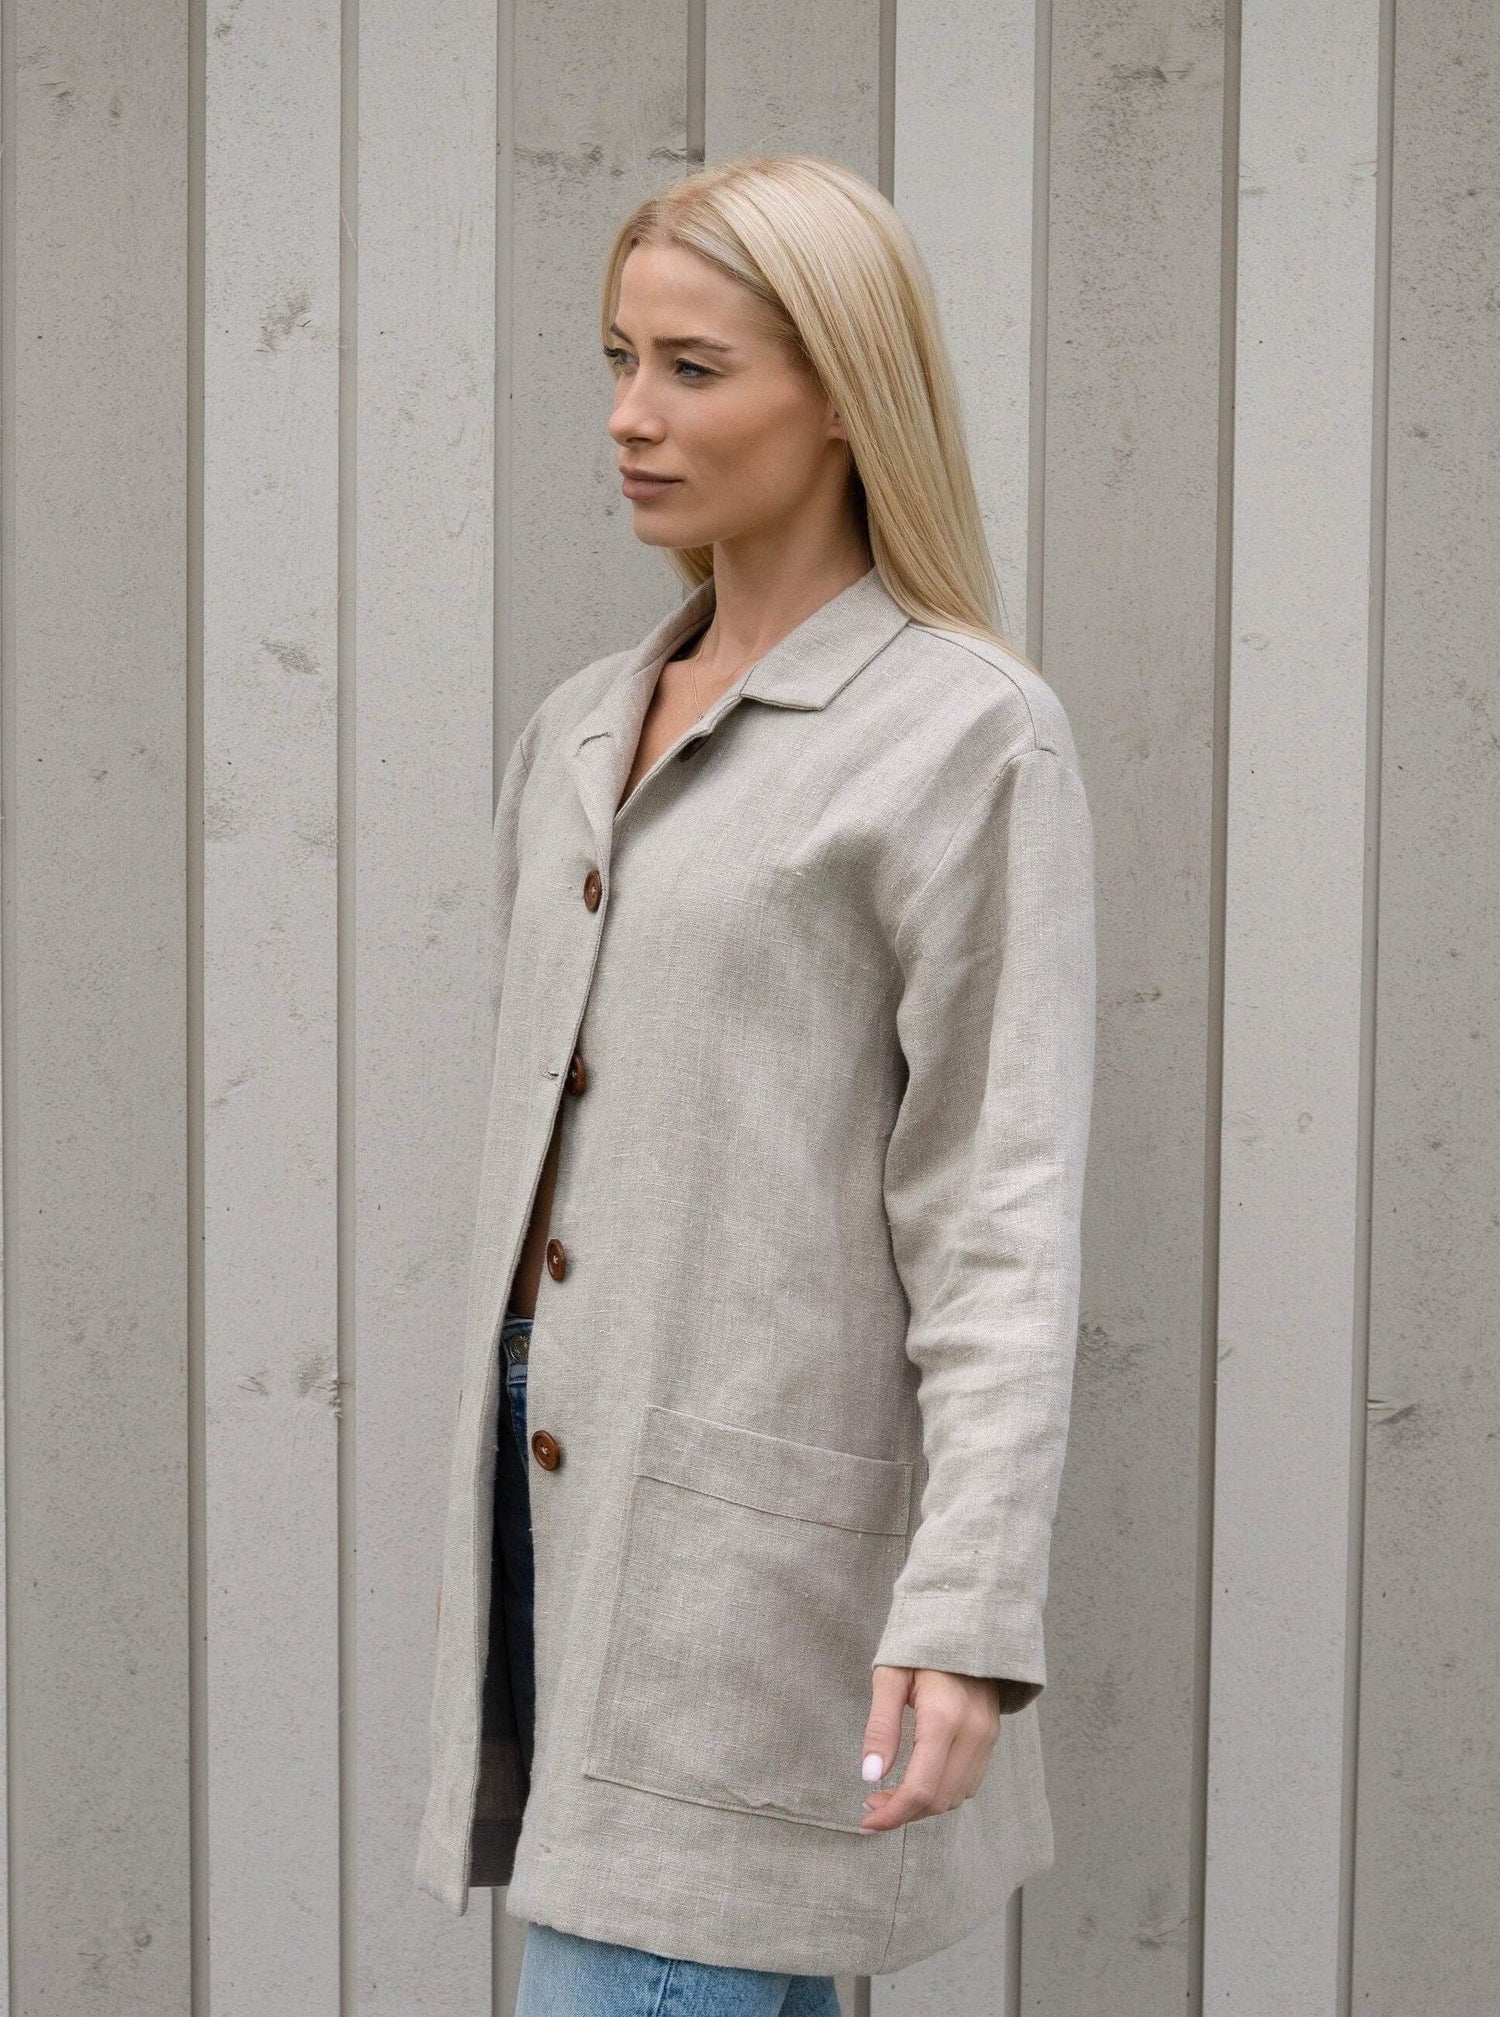 Women's linen jacket with pockets, front view